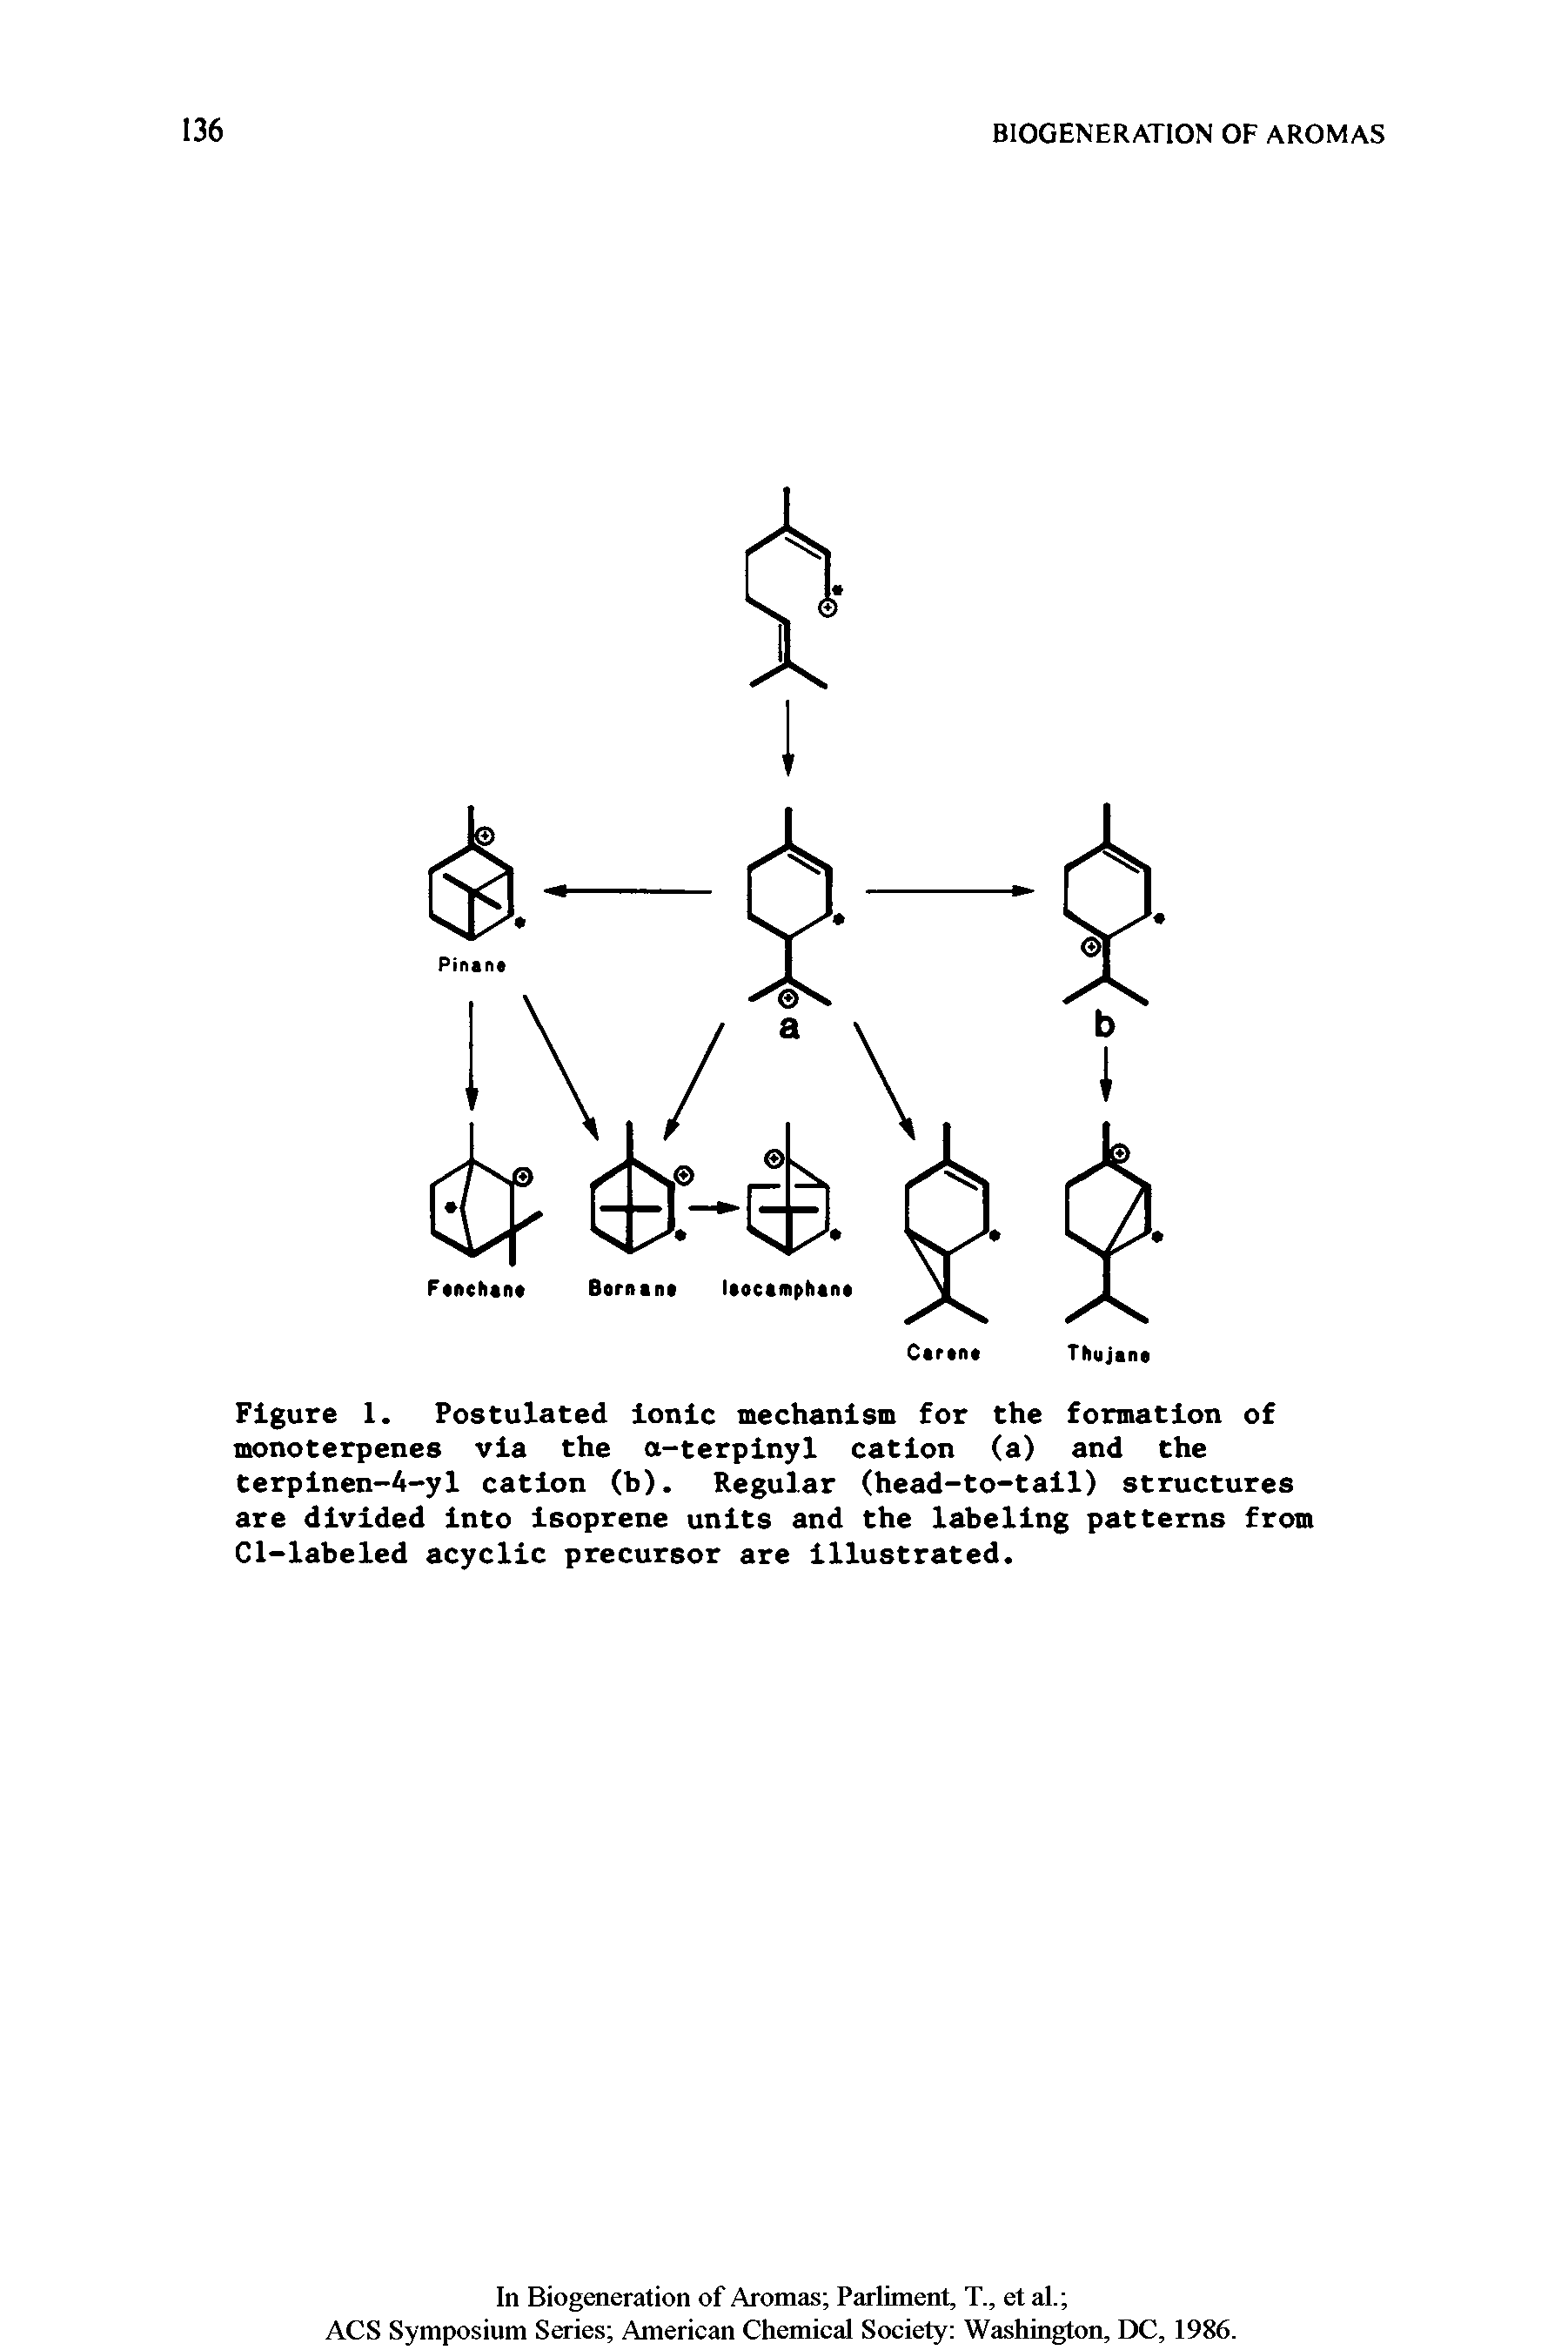 Figure 1. Postulated ionic mechanism for the formation of monoterpenes via the a-terpinyl cation (a) and the terpinen-4-yl cation (b). Regular (head-to-tail) structures are divided into isoprene units and the labeling patterns from Cl-labeled acyclic precursor are illustrated.